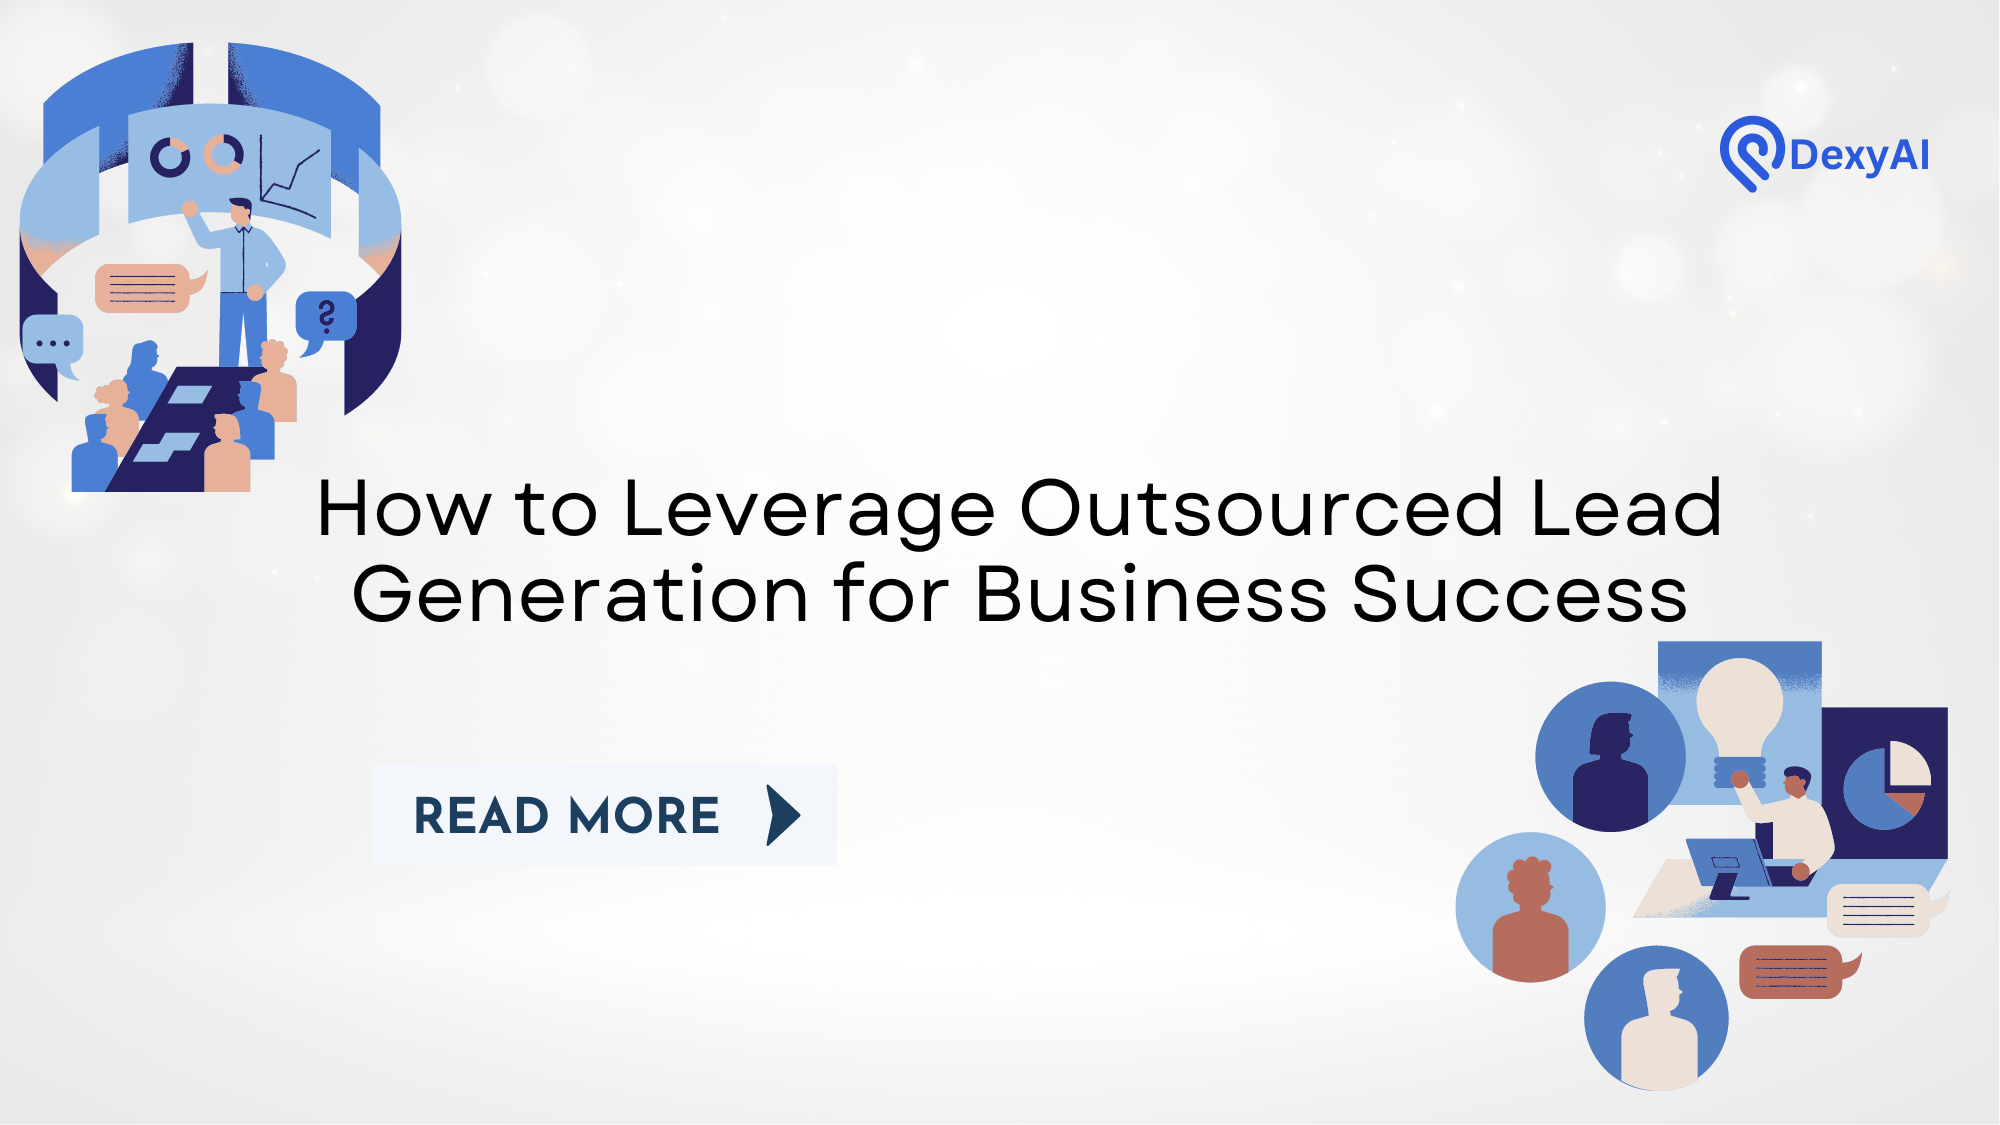 How to Leverage Outsourced Lead Generation for Business Success